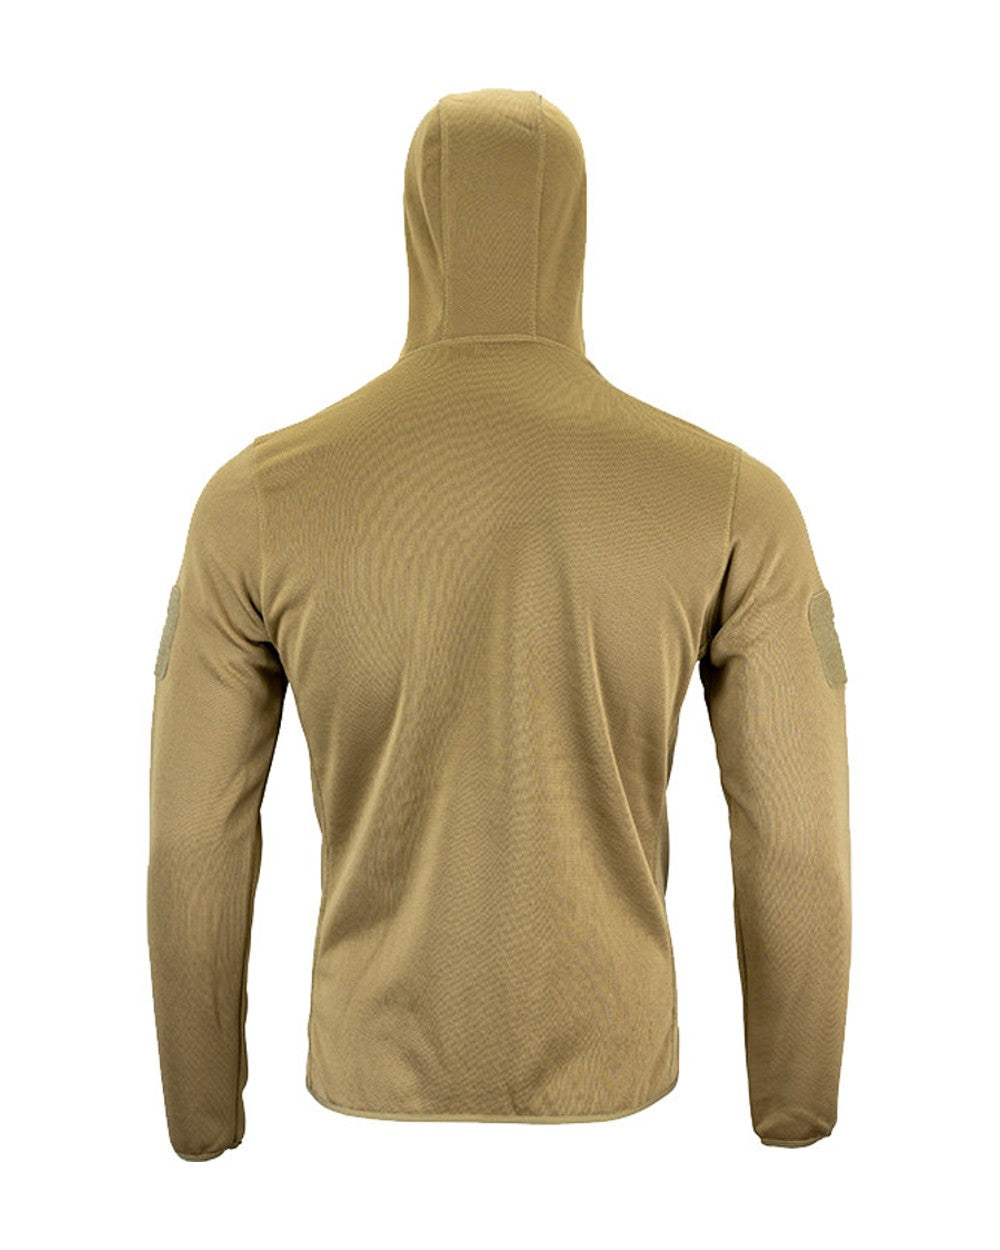 Viper Armour Hoodie in Coyote 